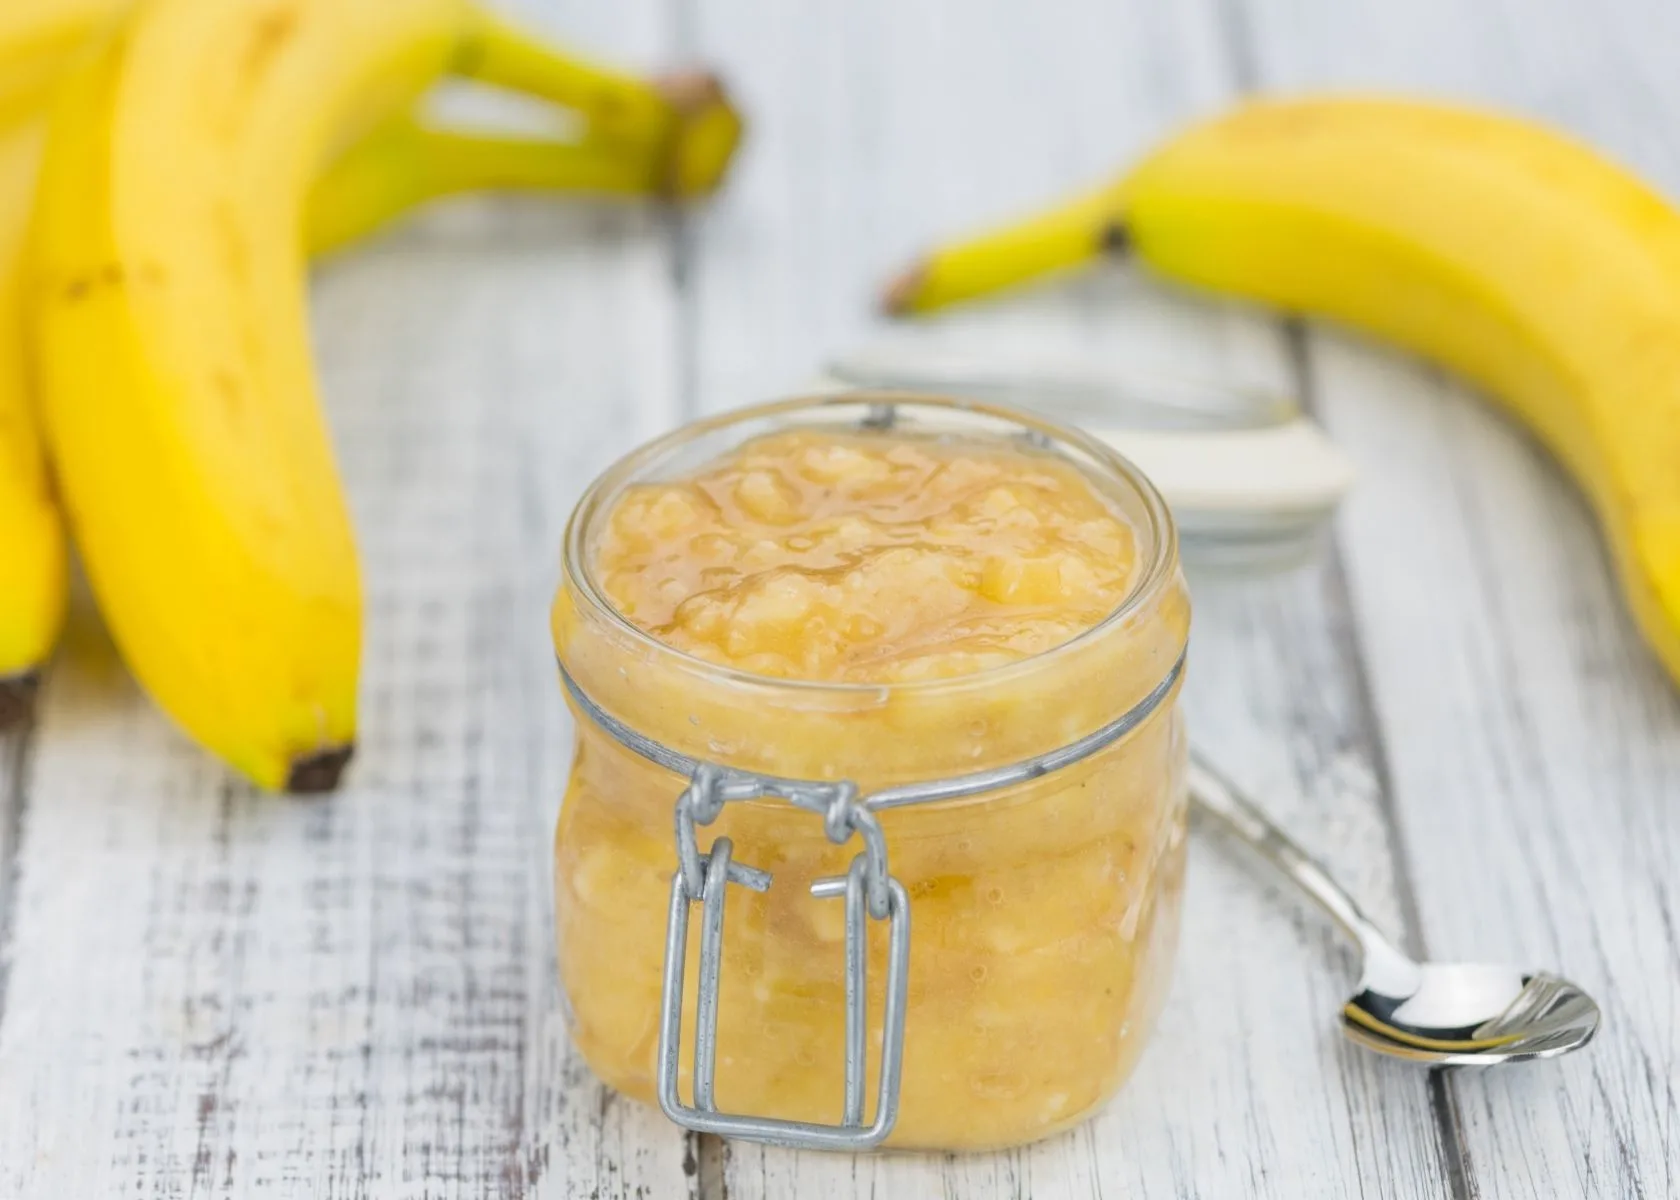 Mashed banana butter substitute in glass jar next to fresh bananas and spoon.